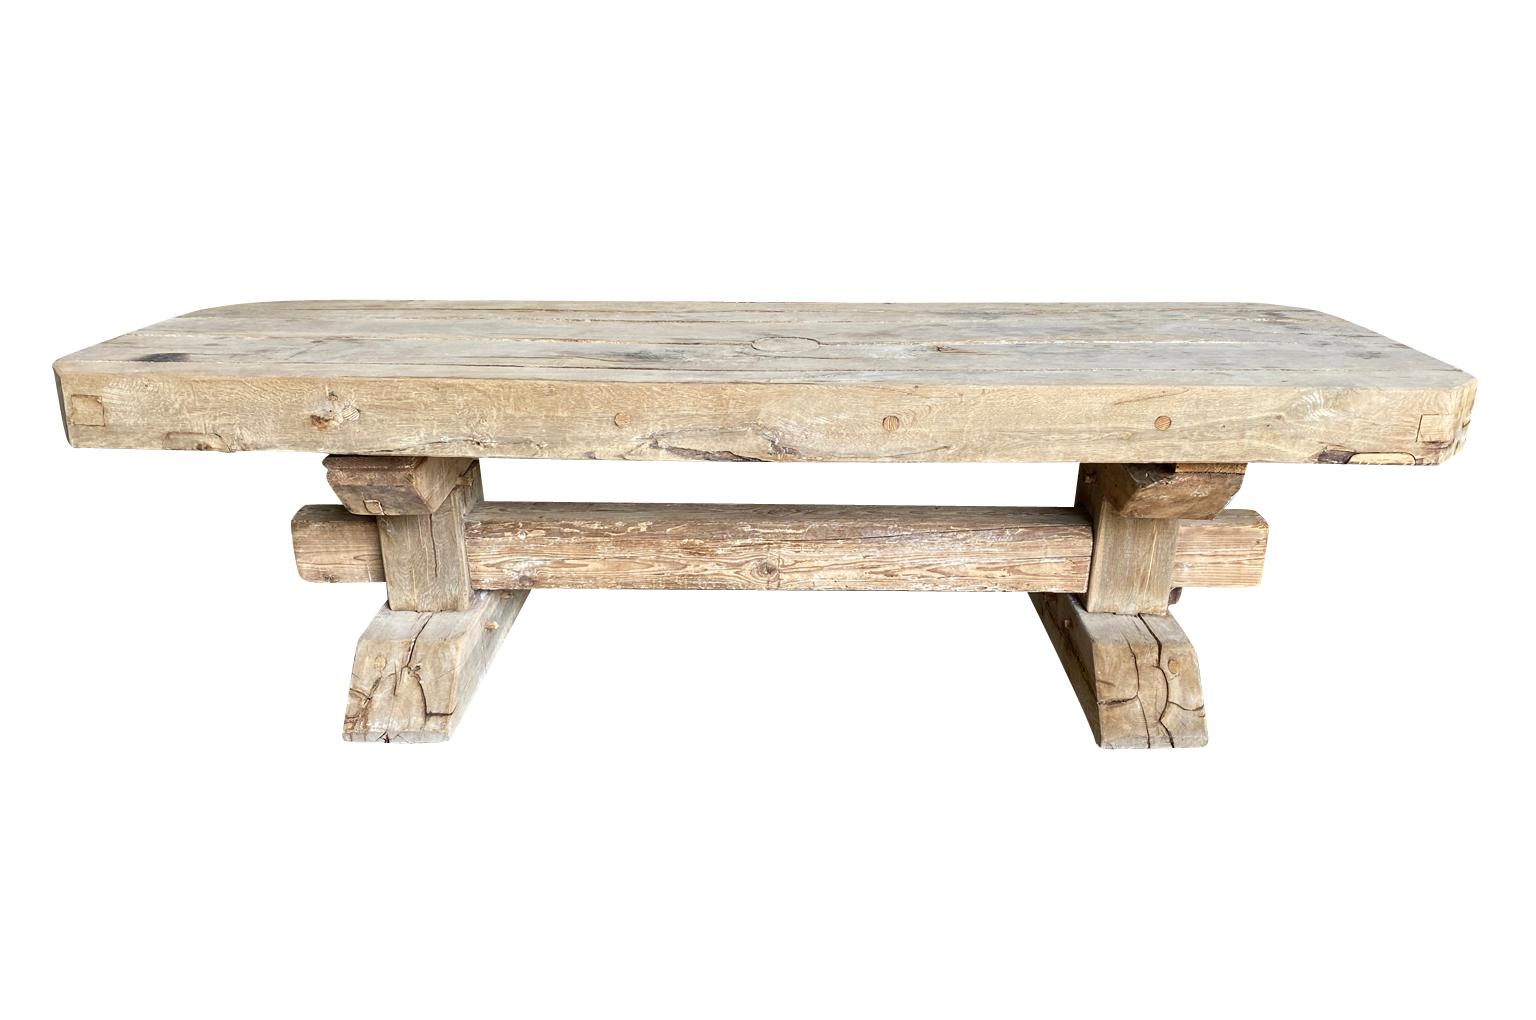 An exceptional grand scale Arte Populaire dining table from the South of France. Wonderfully constructed from from oak and pine with a very thick top, stretcher and feet. The thick top simply rests atop of the base trestle. A wonderful table for